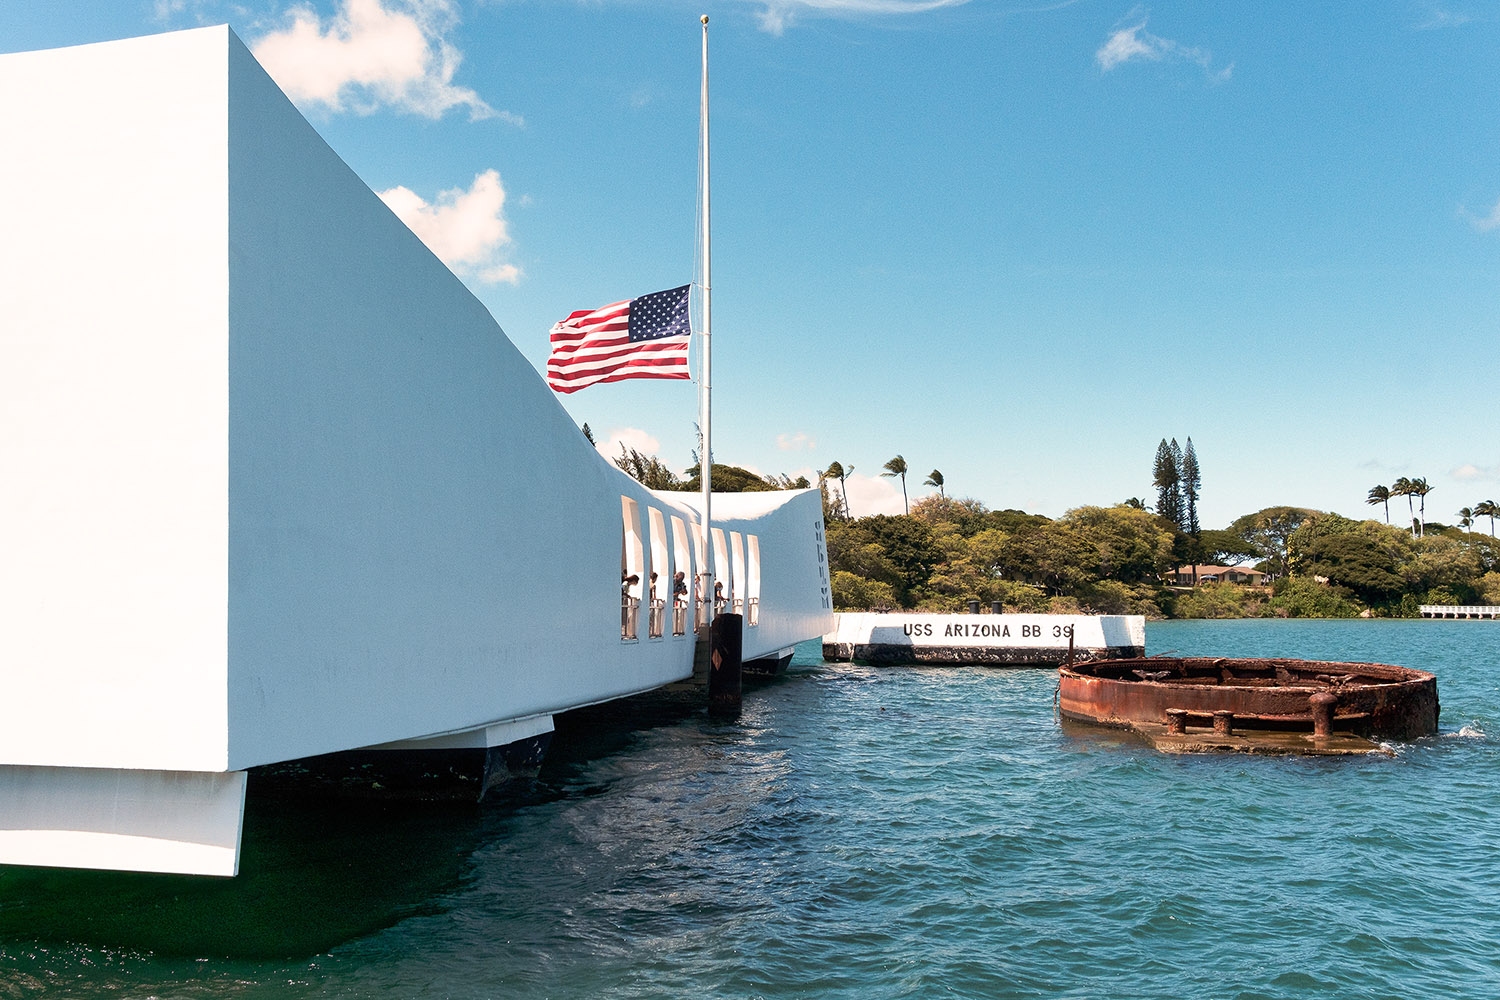 The Arizona Memorial. The flag was at half-mast to honor Colin Powell who had died that day.